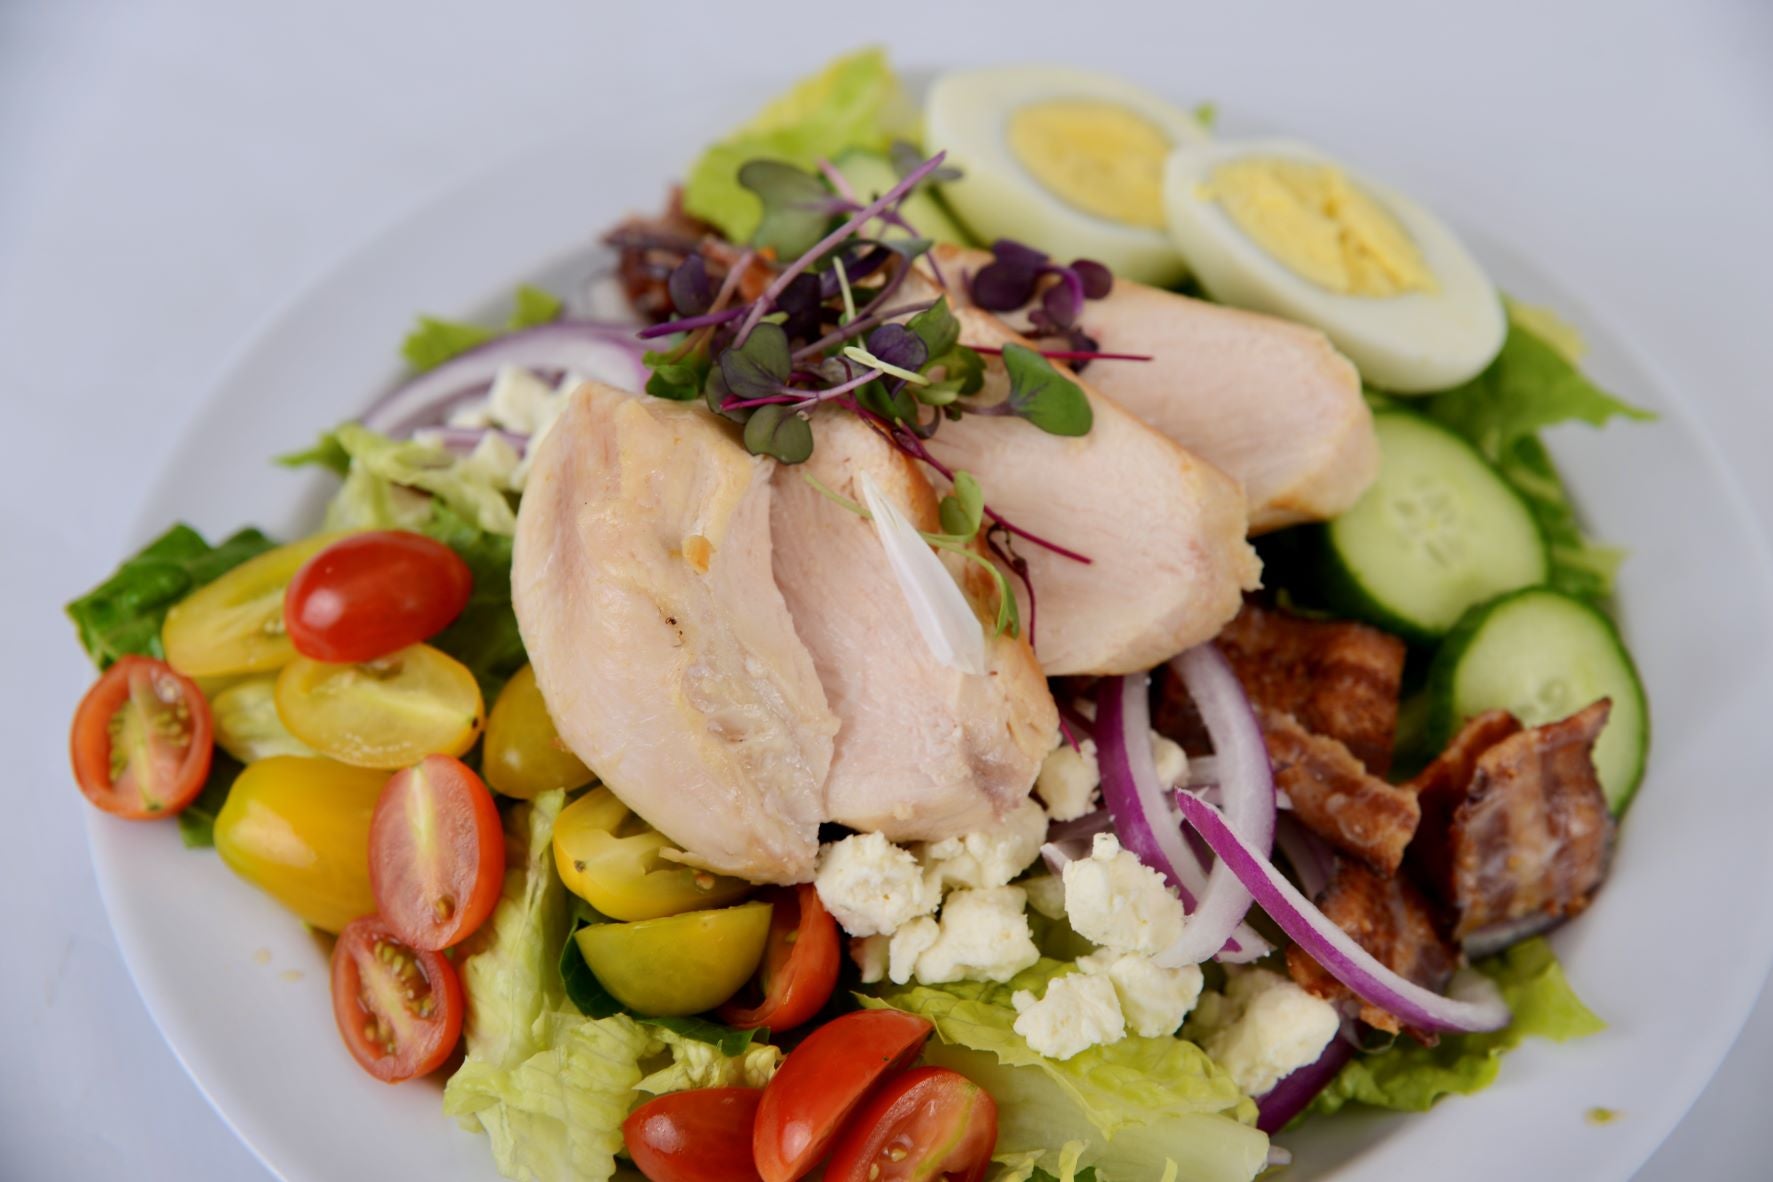 Cobb Salad w/ Chicken Breast or Salmon (Monday 5/13 Delivery)